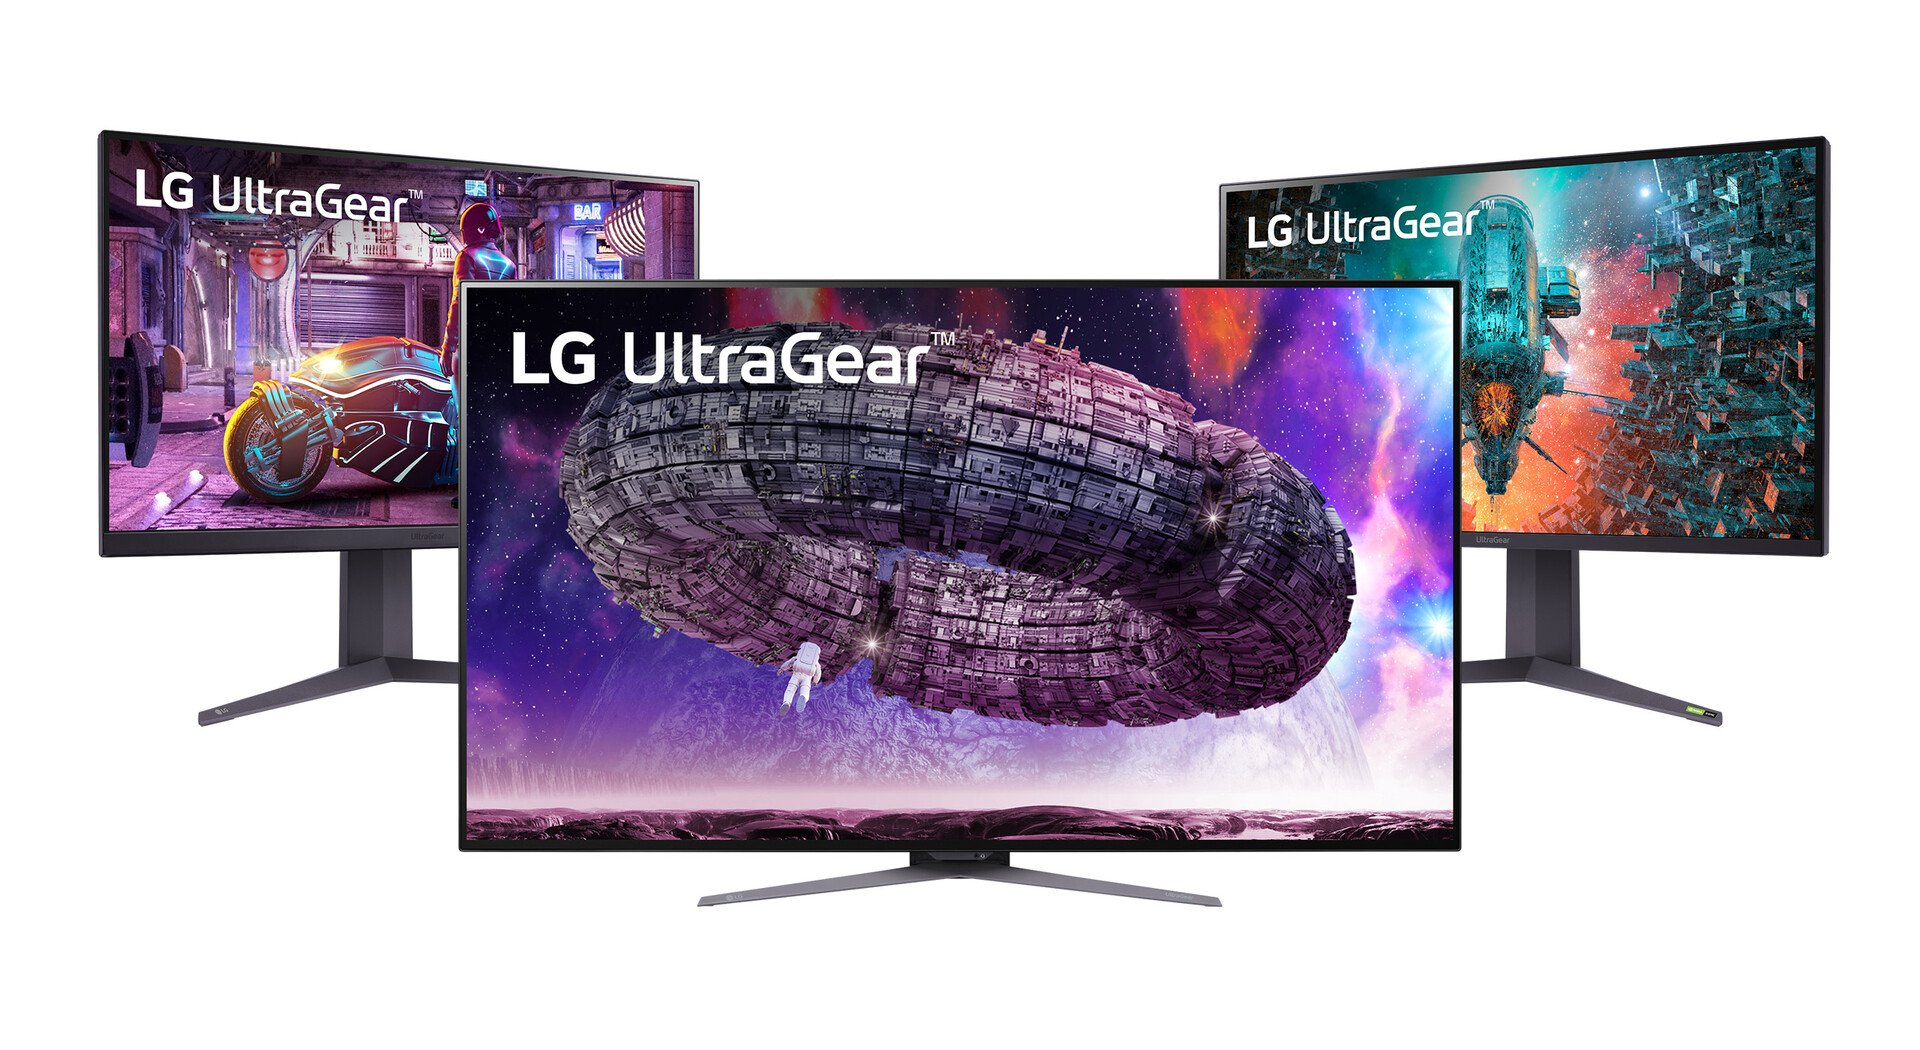 LG 32GN650-B Ultragear 32-inch gaming monitor gets 33% discount on  -   News